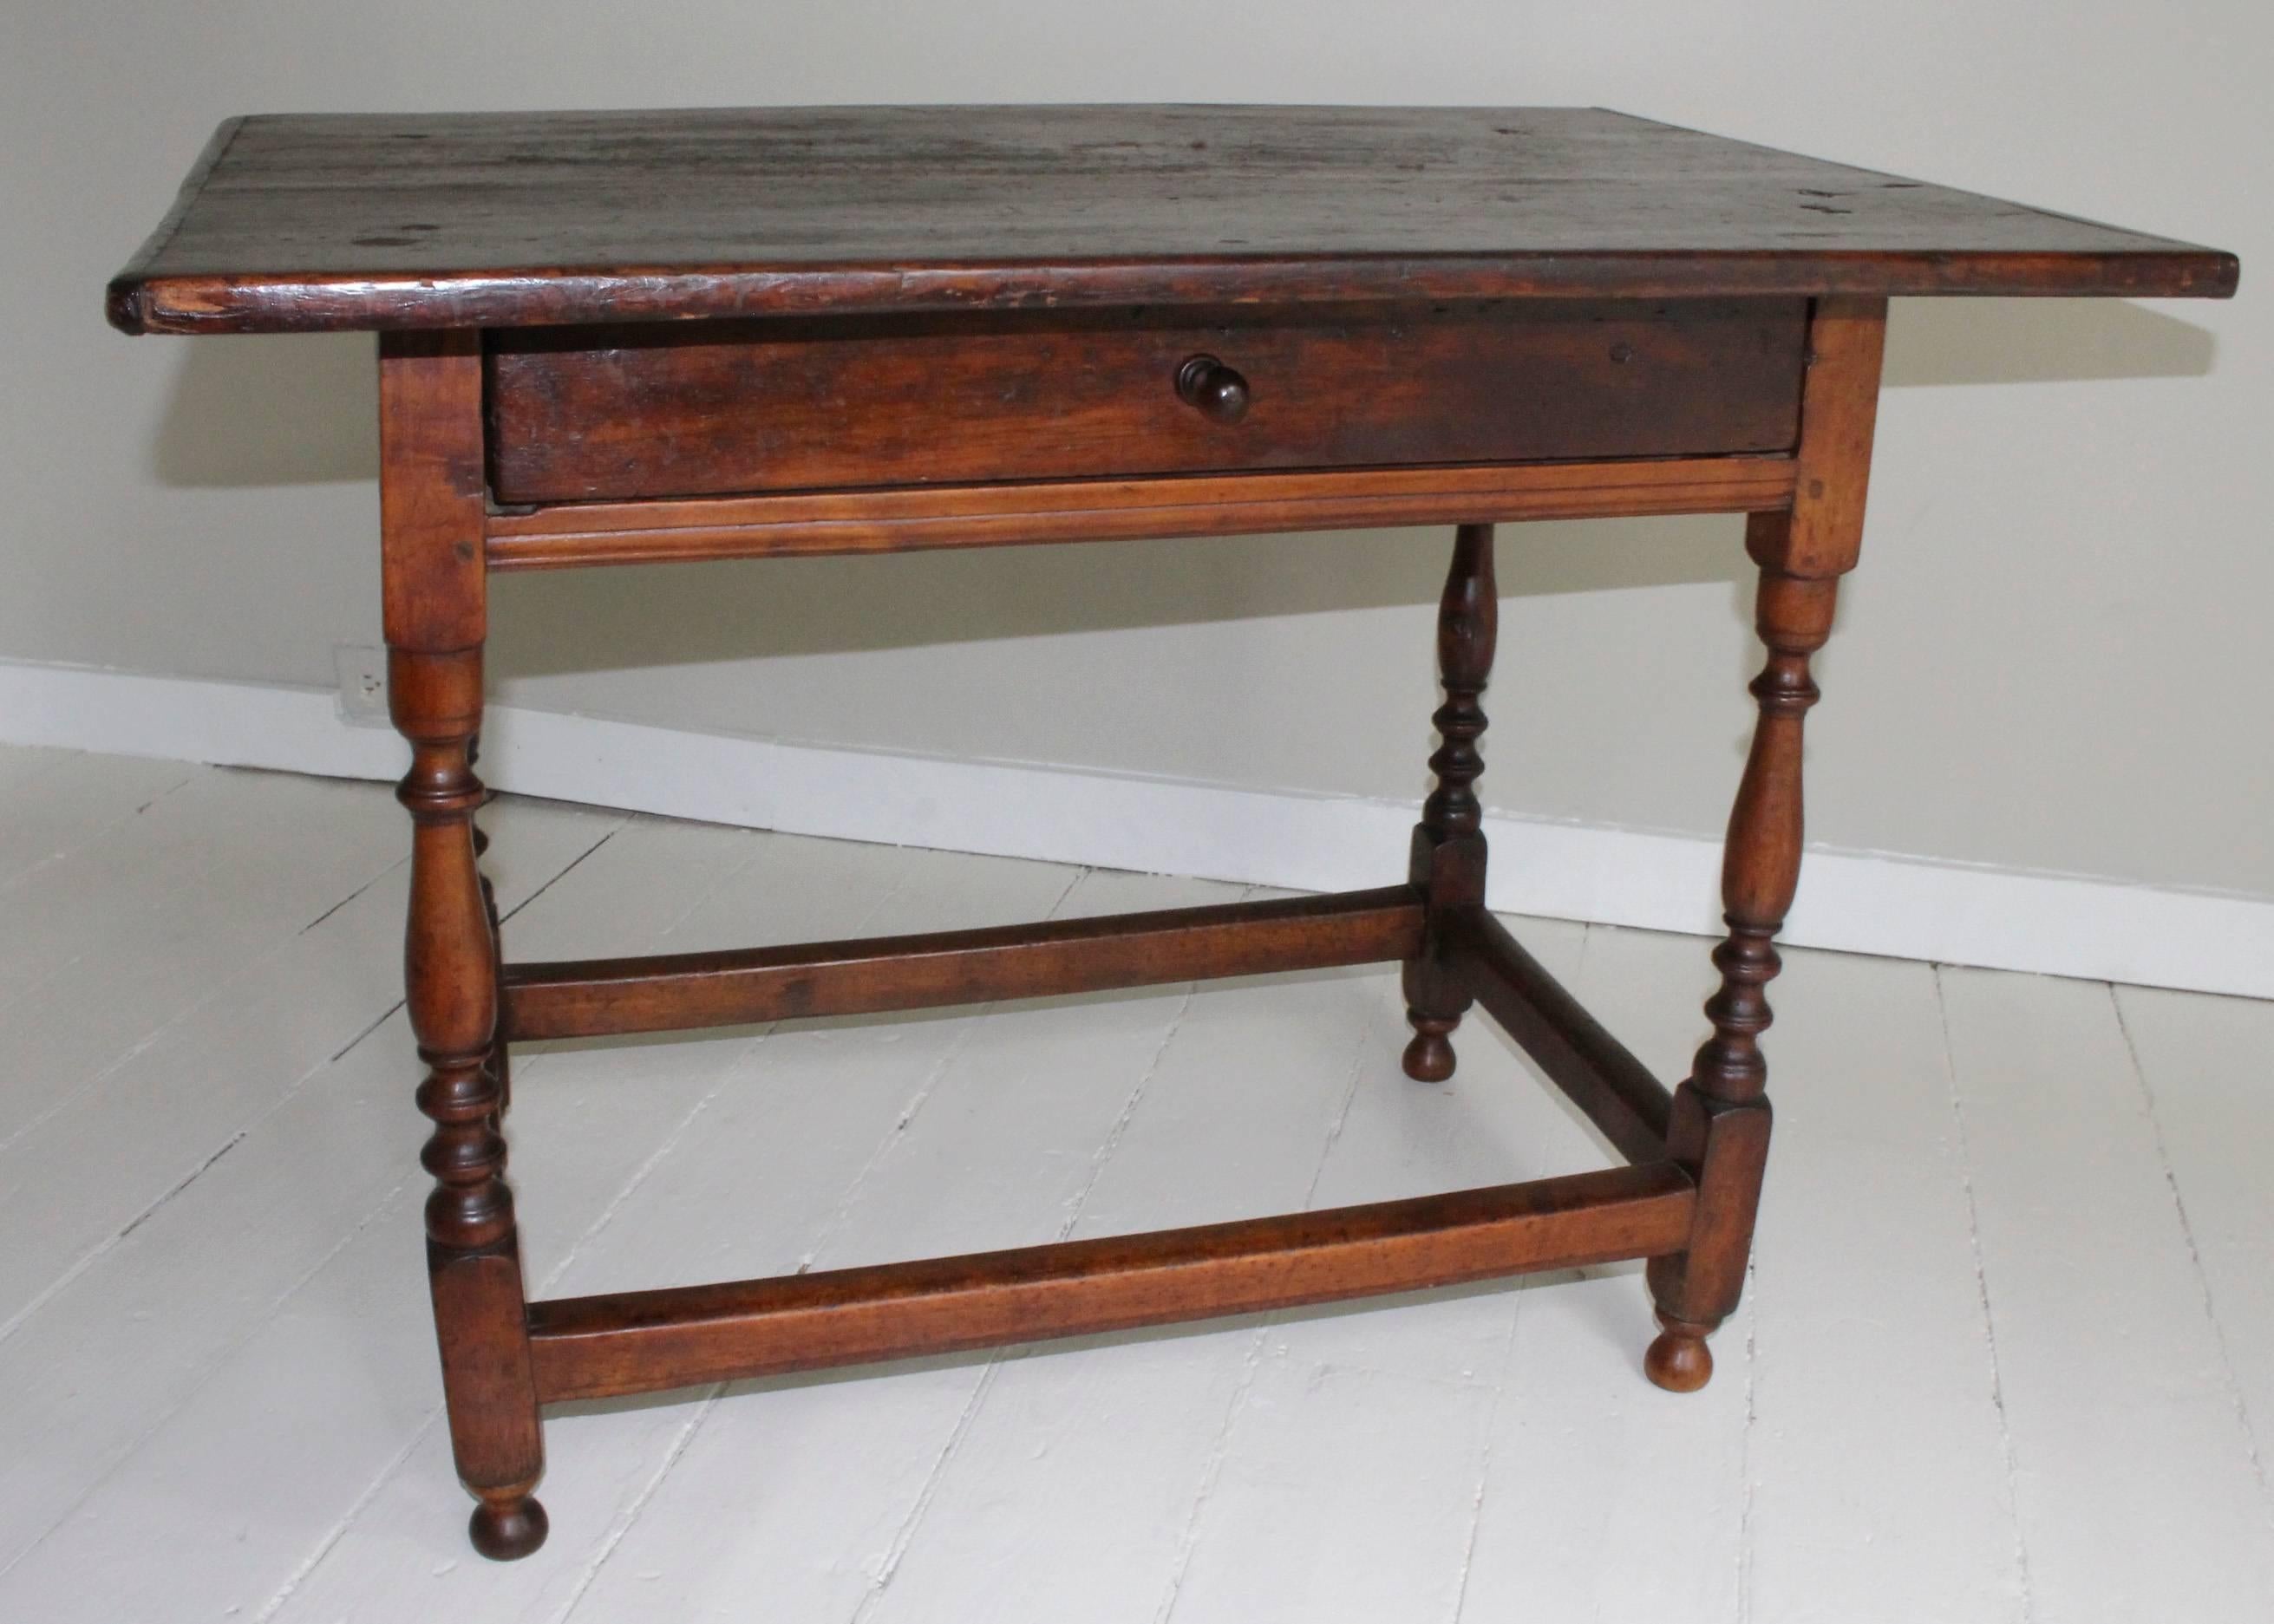 Refined 18th century American oak tavern table on turned wood legs joined by stretcher supporting a broad plank top with wonderful time-worn patina. Single drawer distinguished by Novel Elongated Pull.